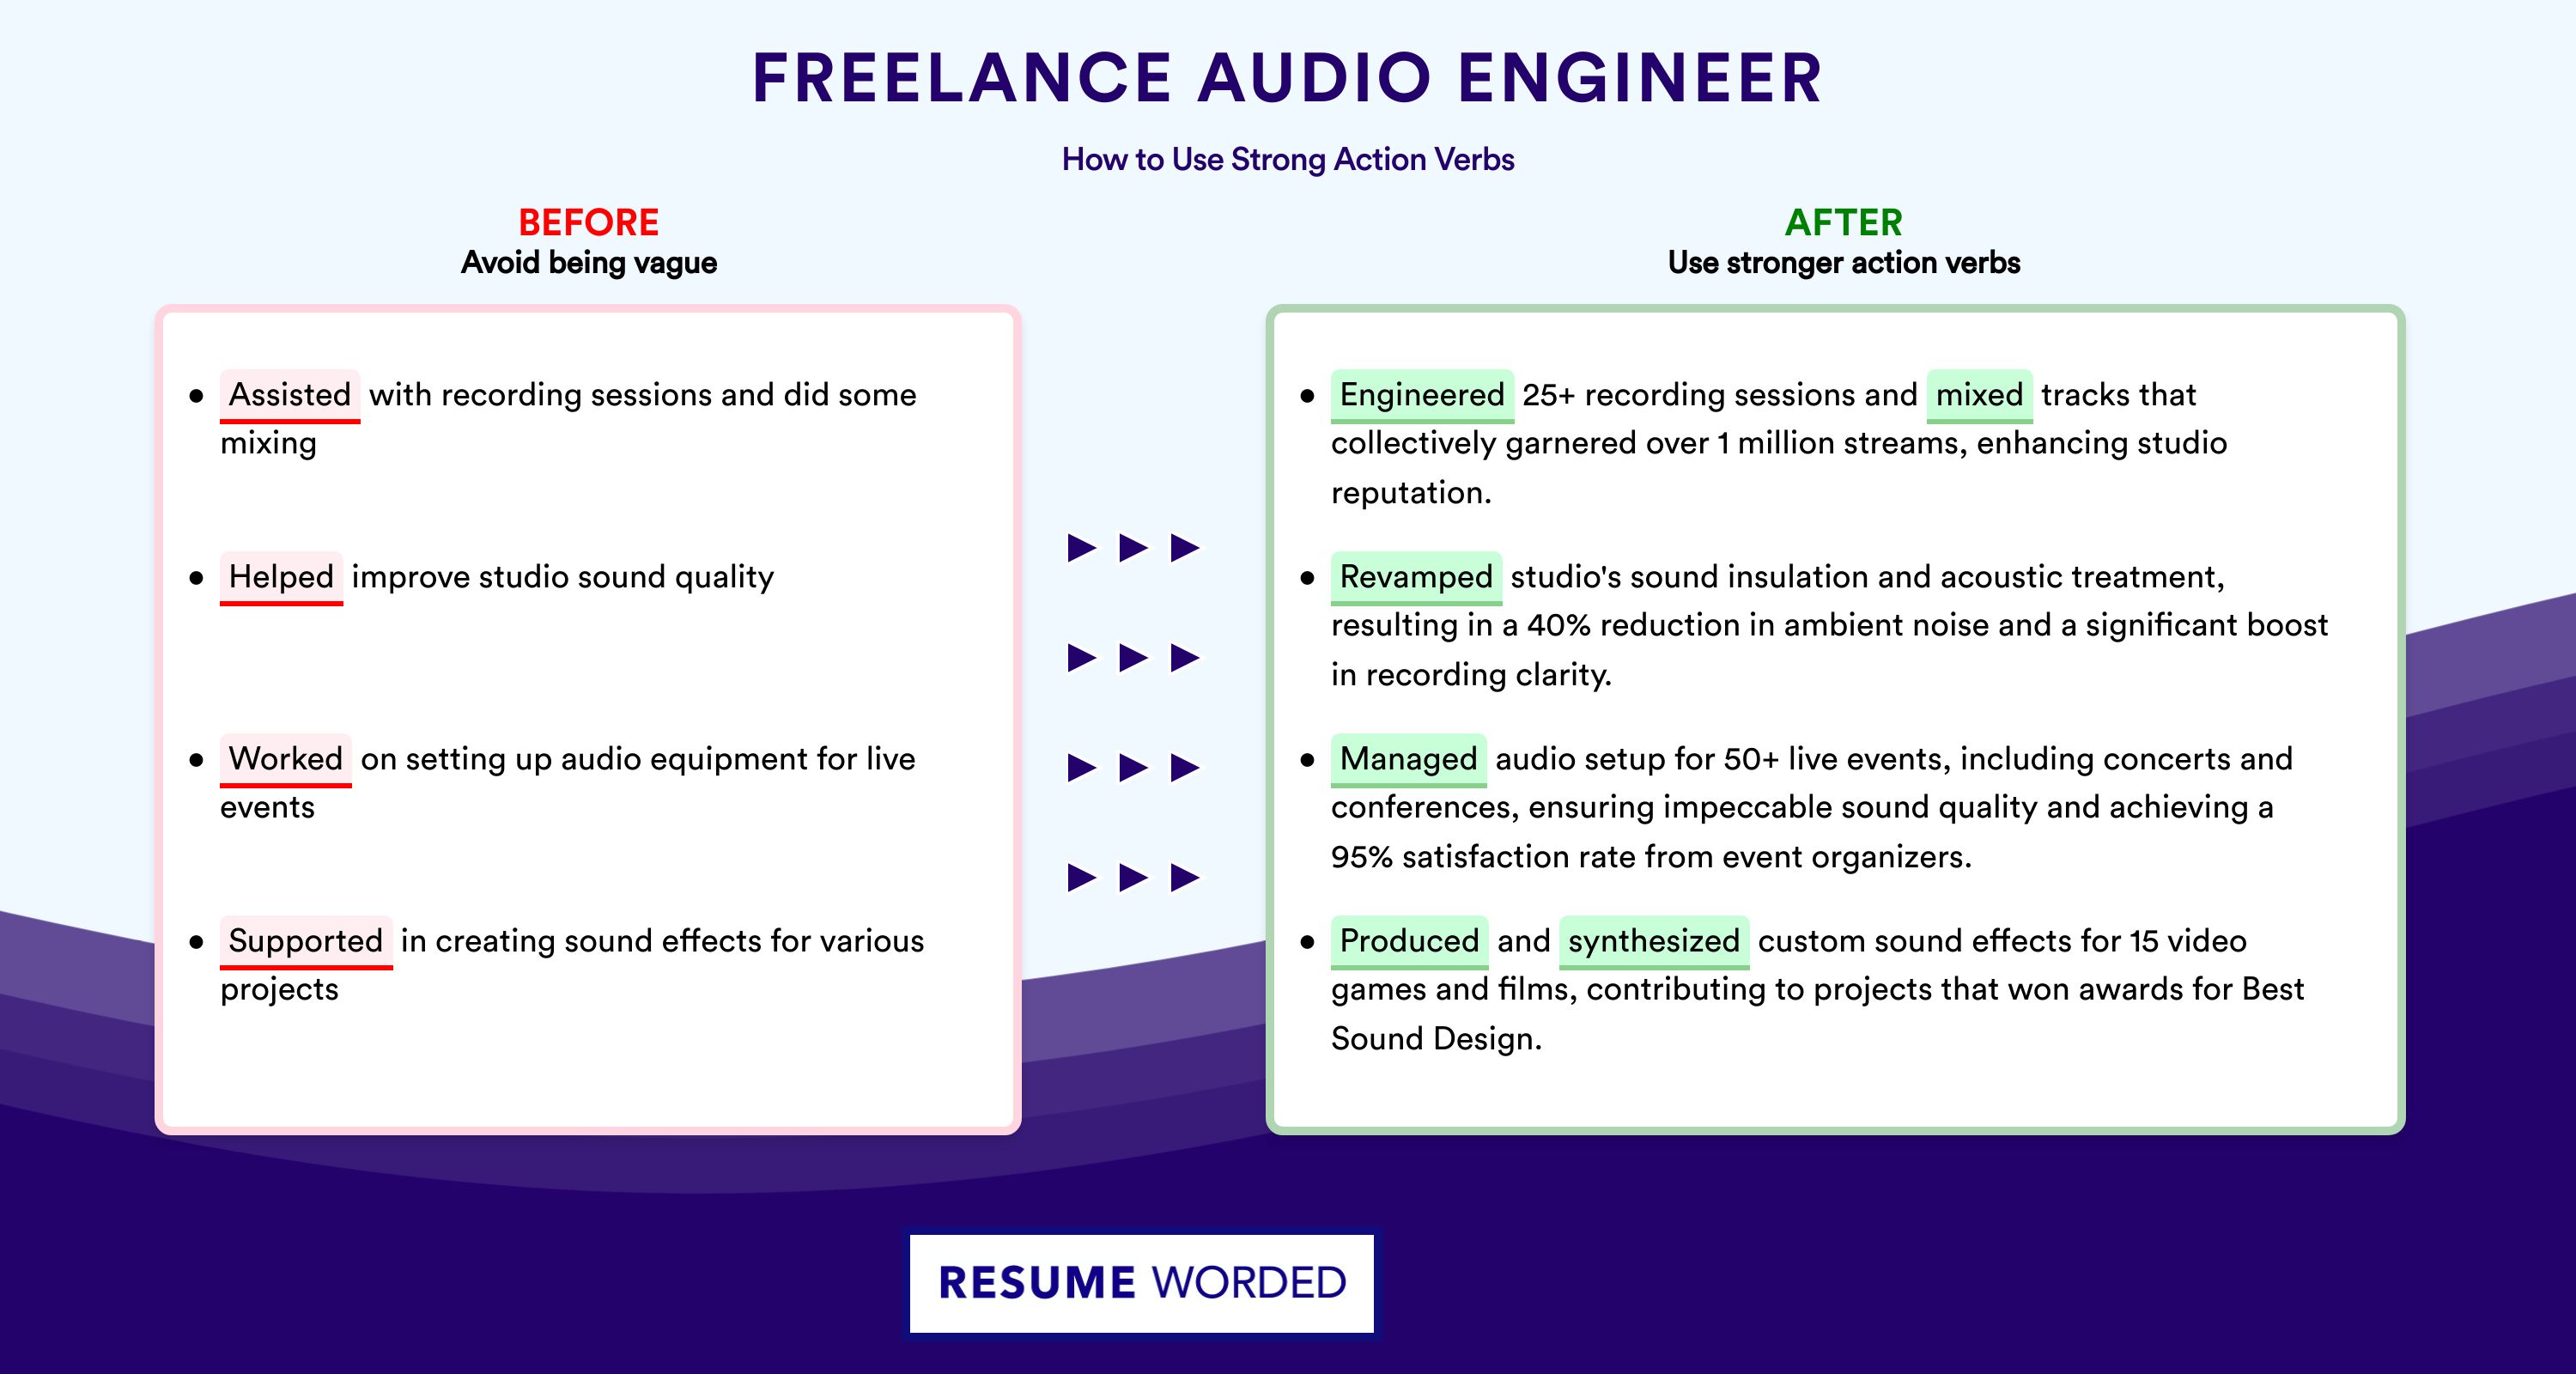 Action Verbs for Freelance Audio Engineer